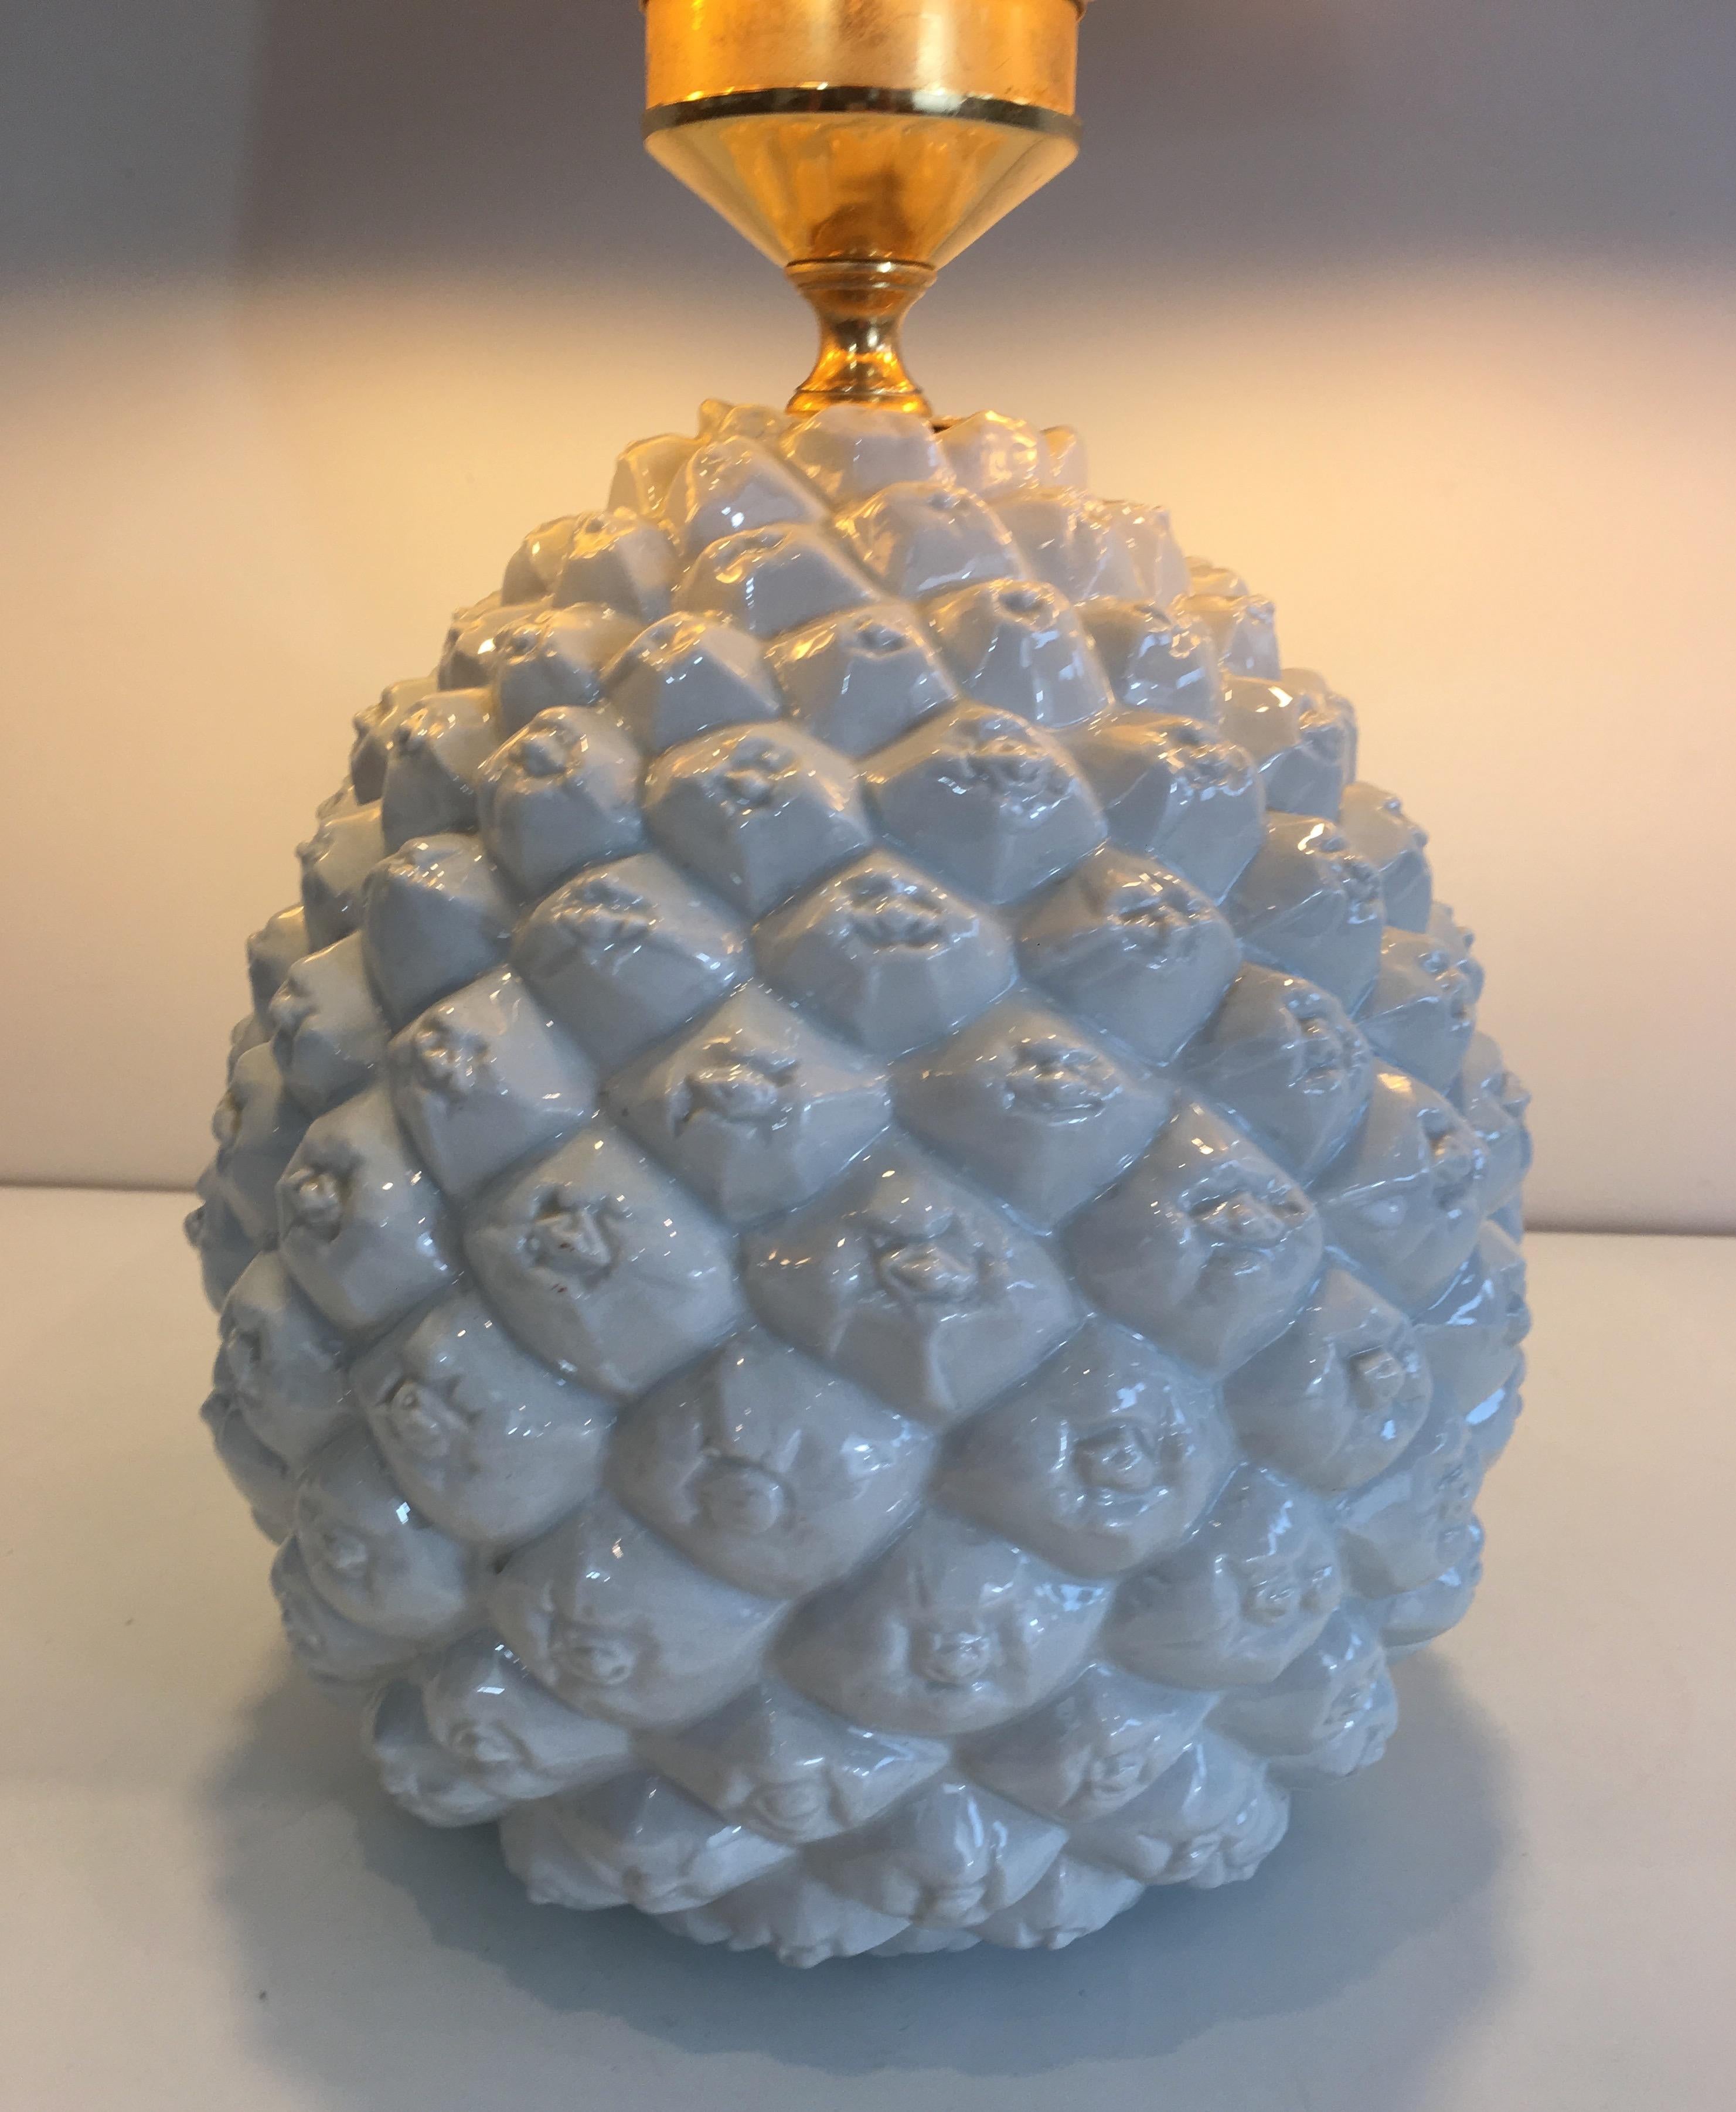 Design Pineapple Porcelain Table Lamp, Italy, circa 1970 For Sale 5